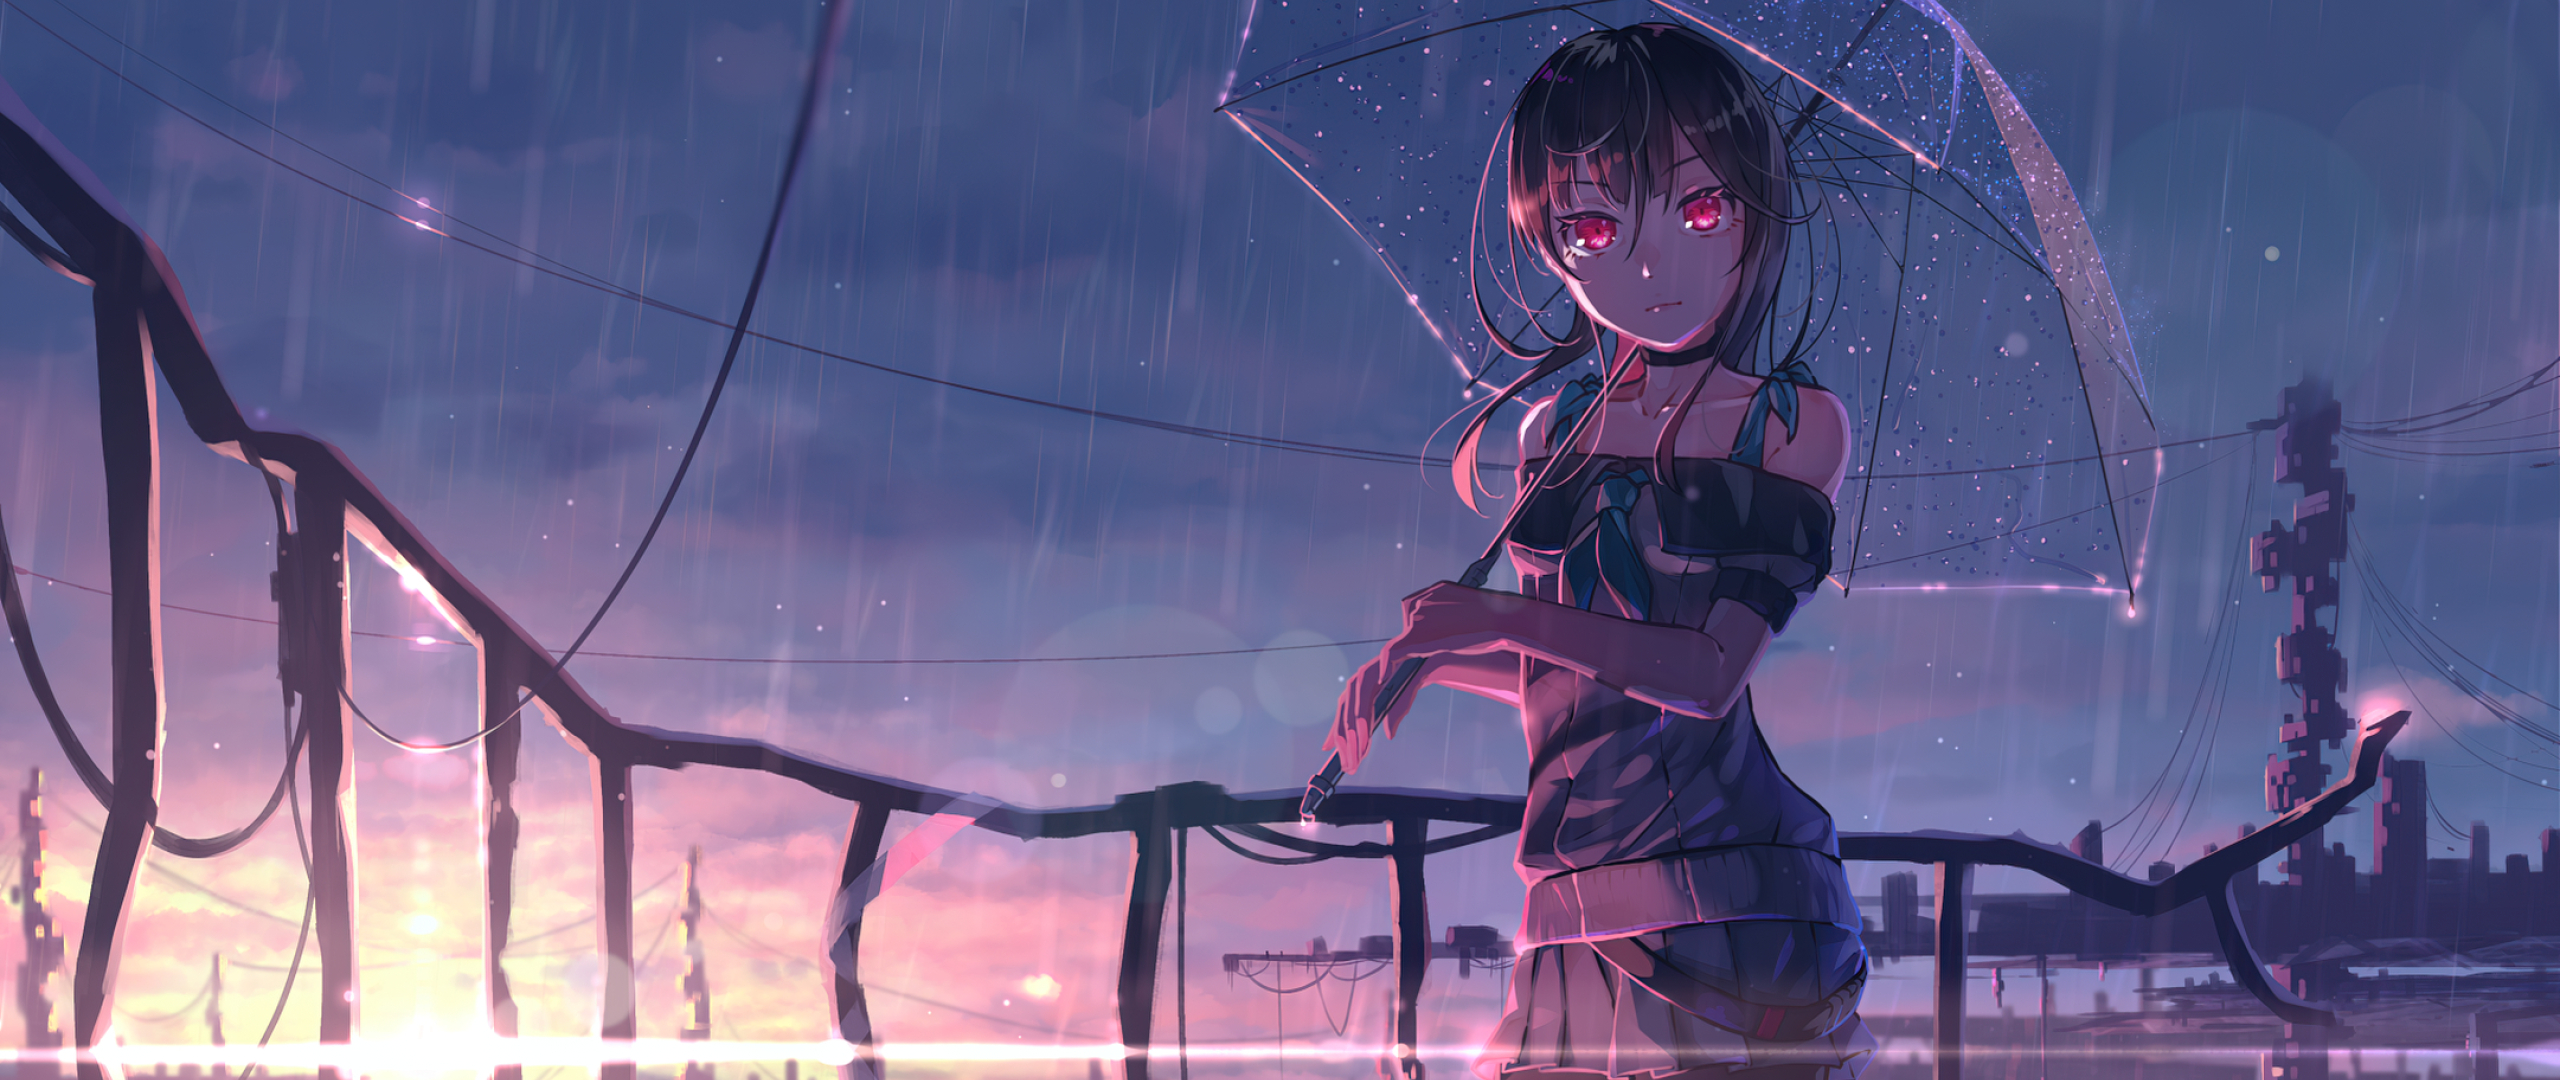 2560x1080 Red Eye Anime Girl 2560x1080 Resolution Wallpaper Hd Anime 4k Wallpapers Images Photos And Background Wallpapers Den